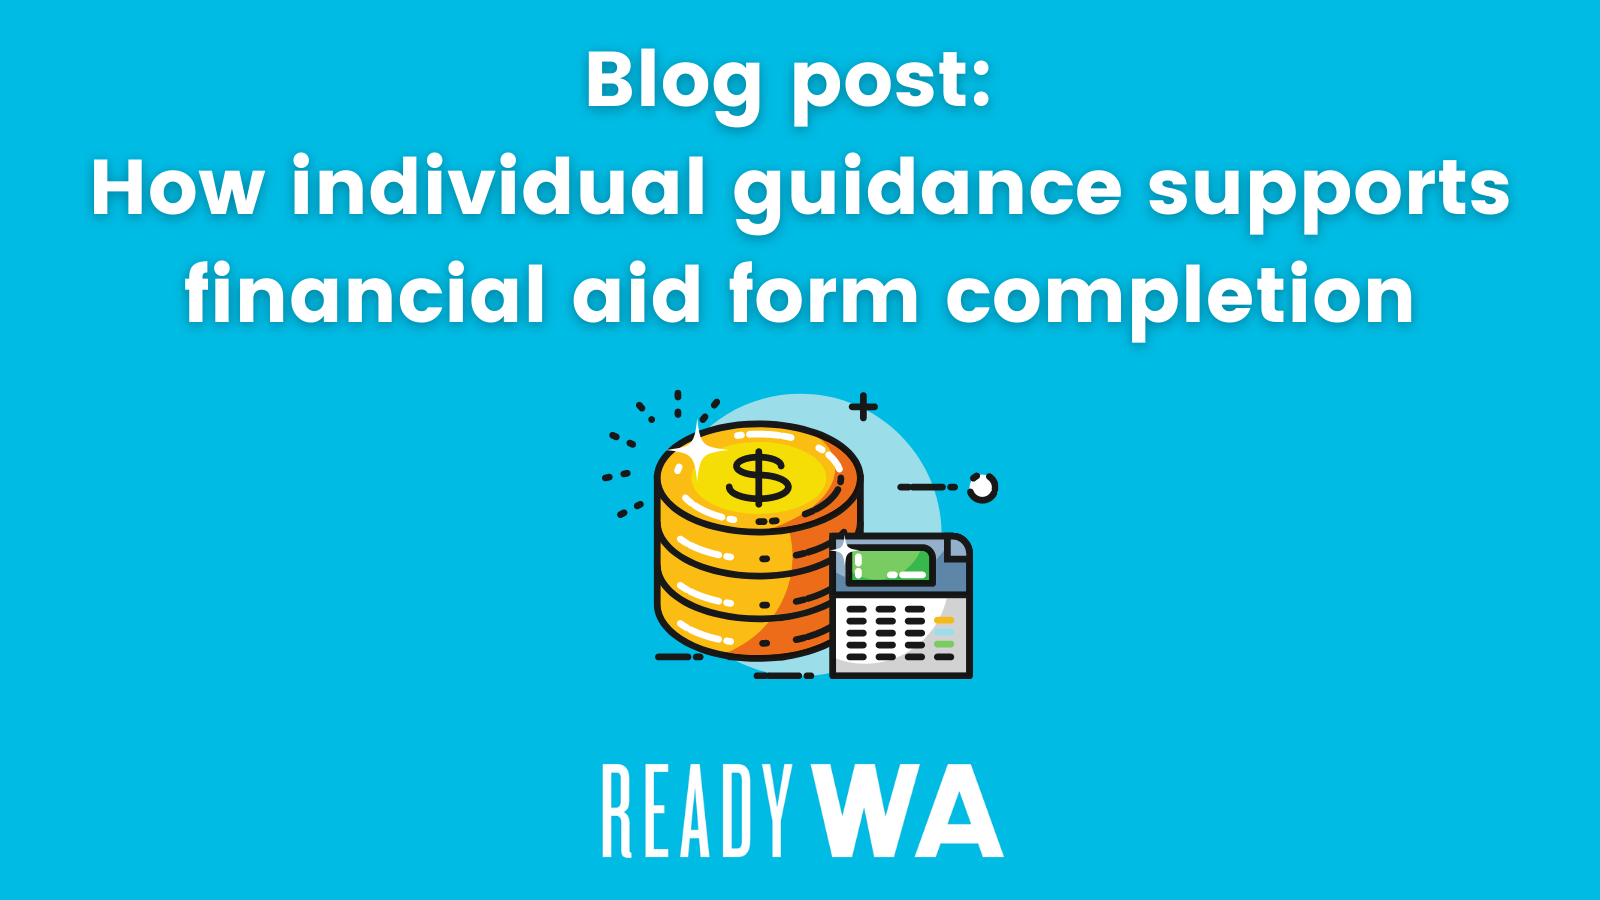 Individual guidance supports financial aid form completion